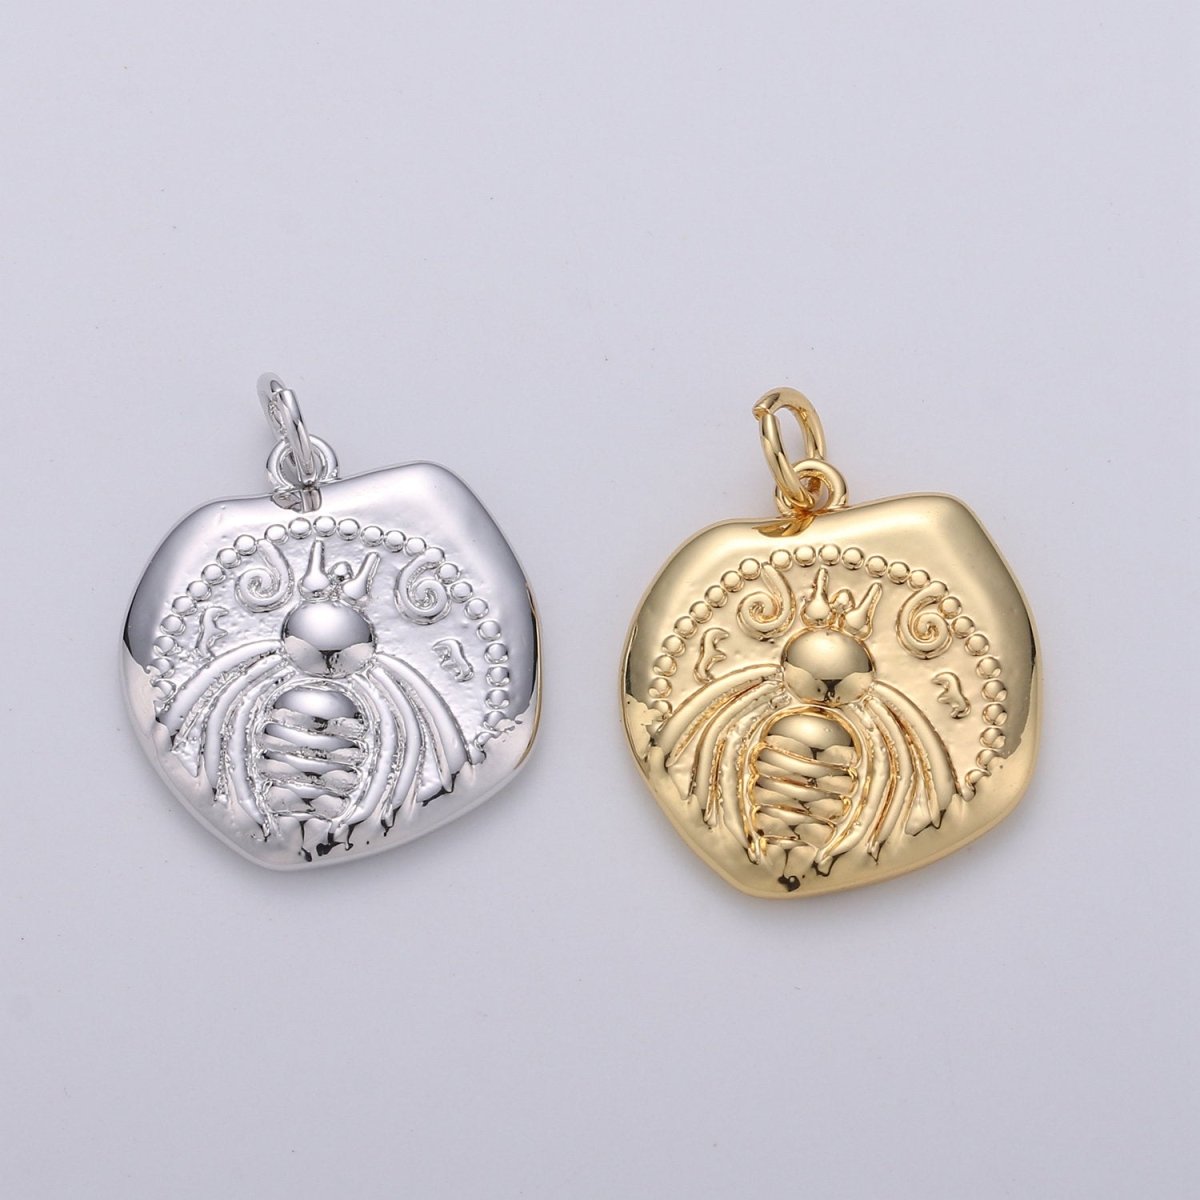 Gold Artemis Bee Coin Charm | Ancient Greek Coin Replica Pendant 14k Gold Filled Ephesus Bee Pendant Necklace | Roman Coin Jewelry Supply D-287 D-288 - DLUXCA